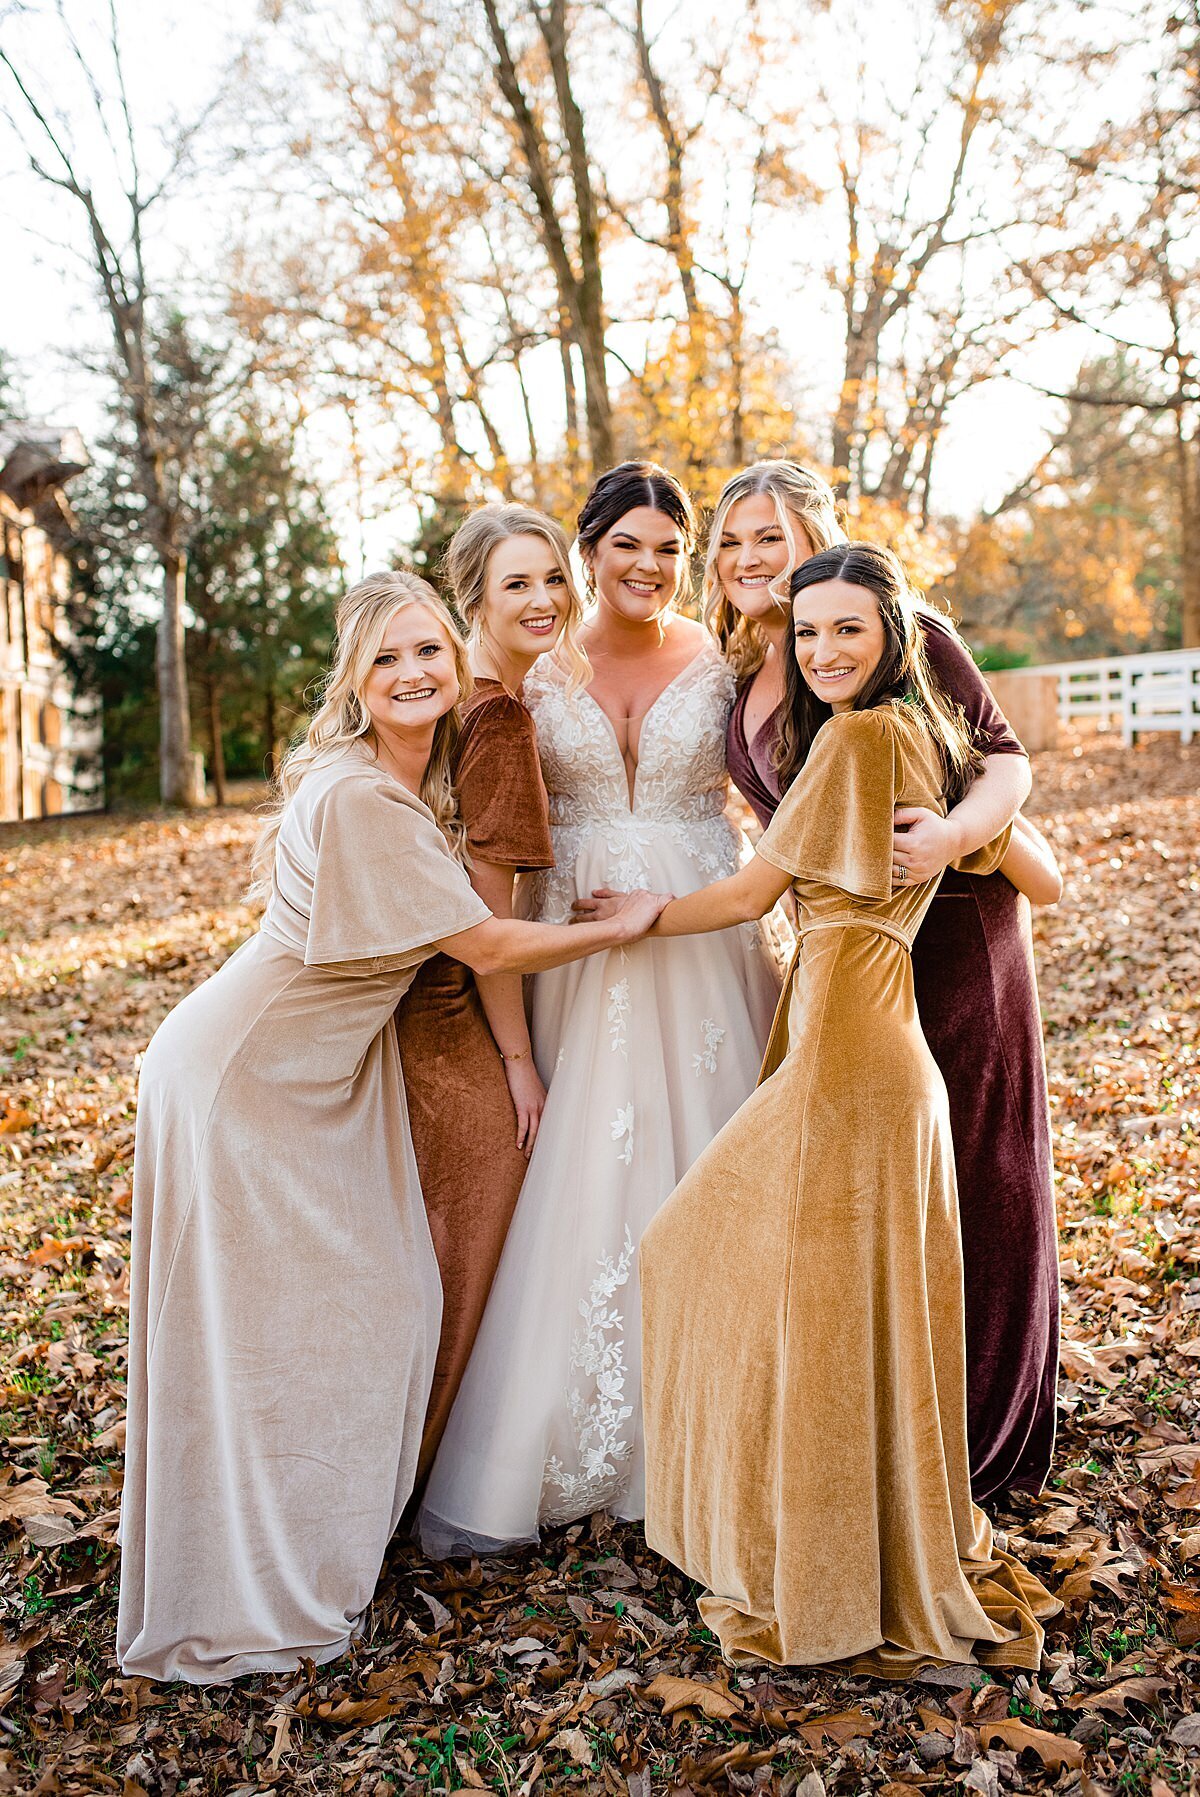 Bridesmaids wearing velvet dresses in autumn shades standing on leaves